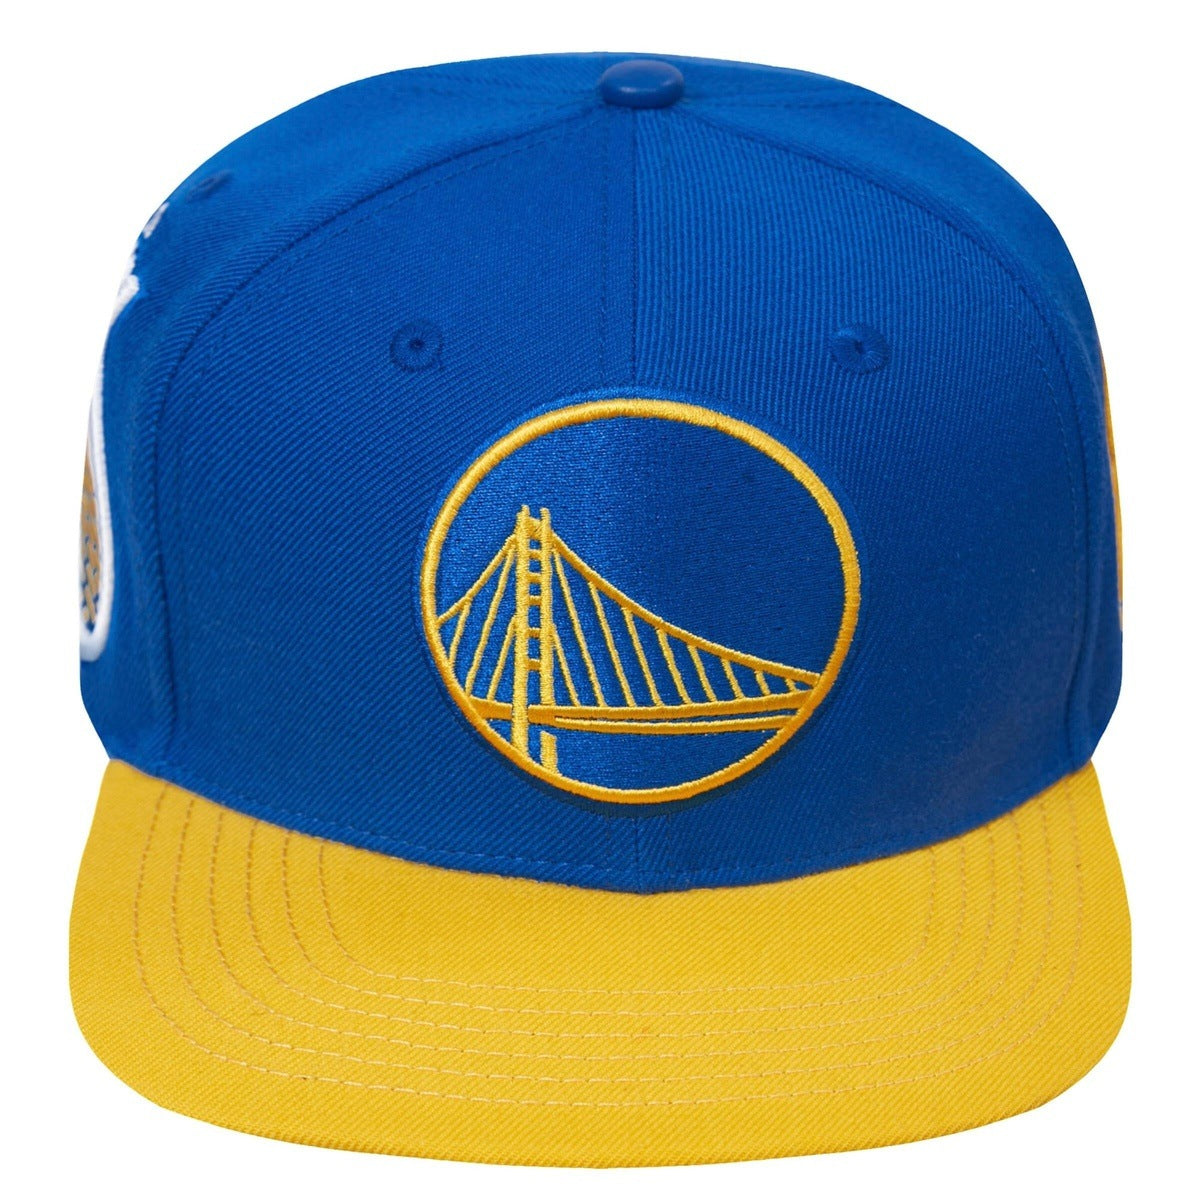 Golden state warriors throwback warm up jersey with matching hat